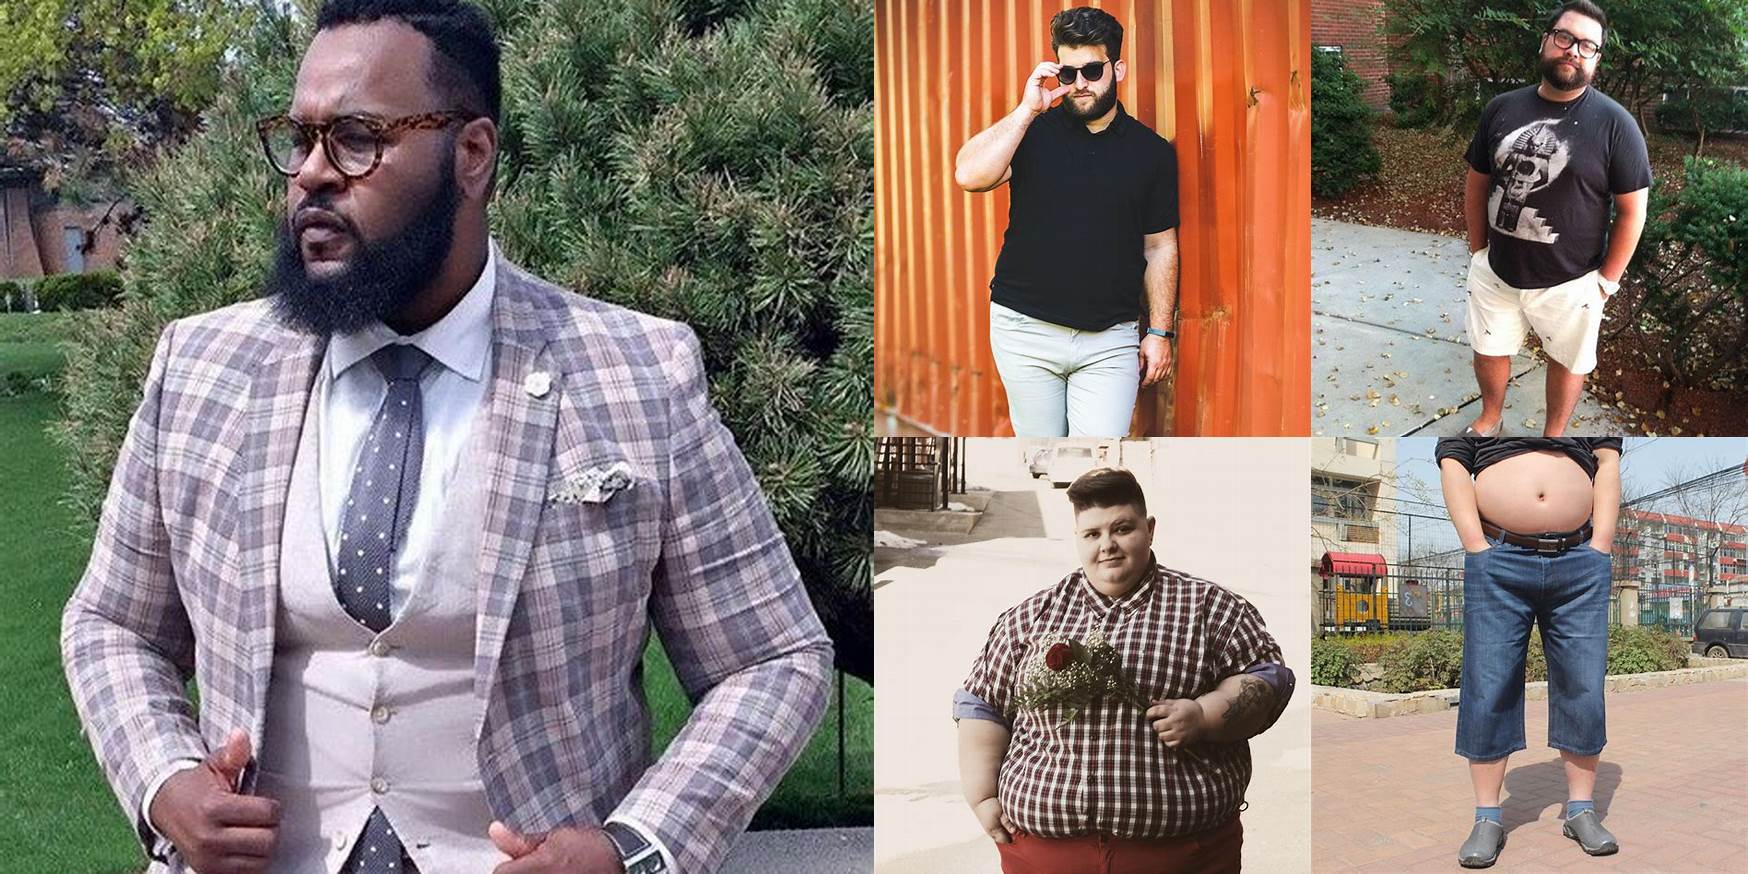 Where To Buy Clothes For Short Fat Guys